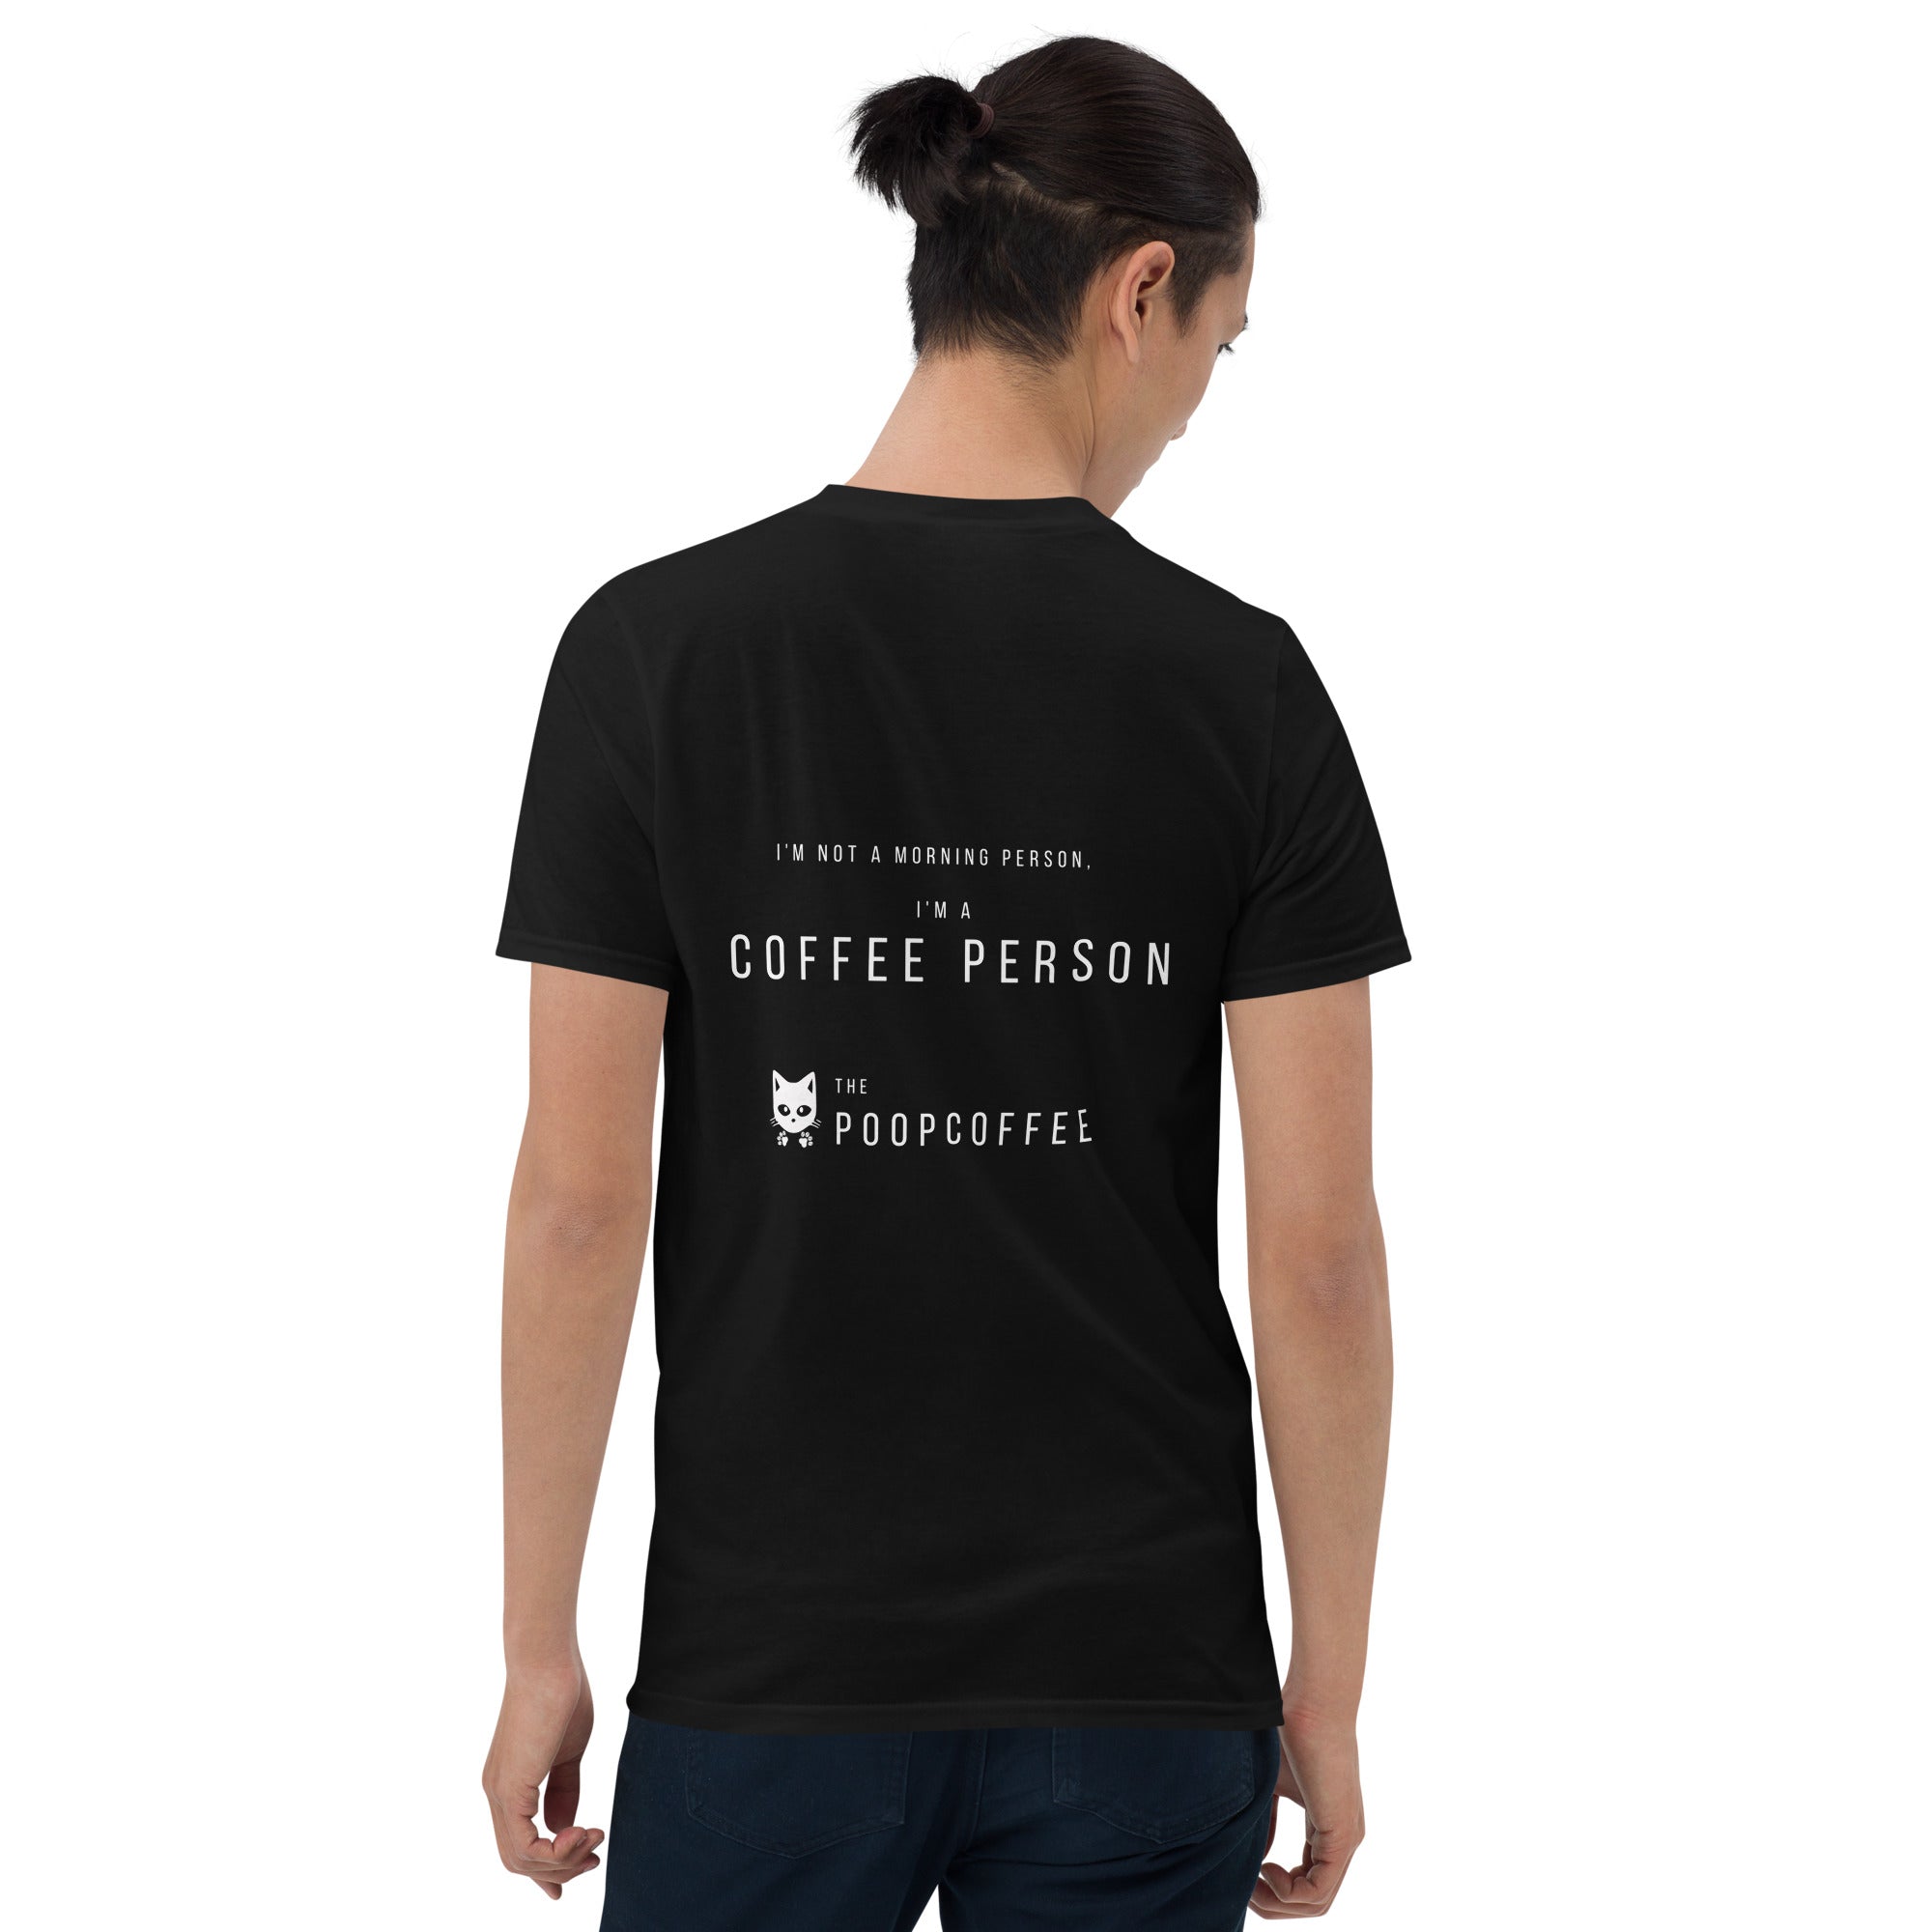 I'm not a morning person, I'm a coffee person Unisex T-shirt black | The Poop Coffee